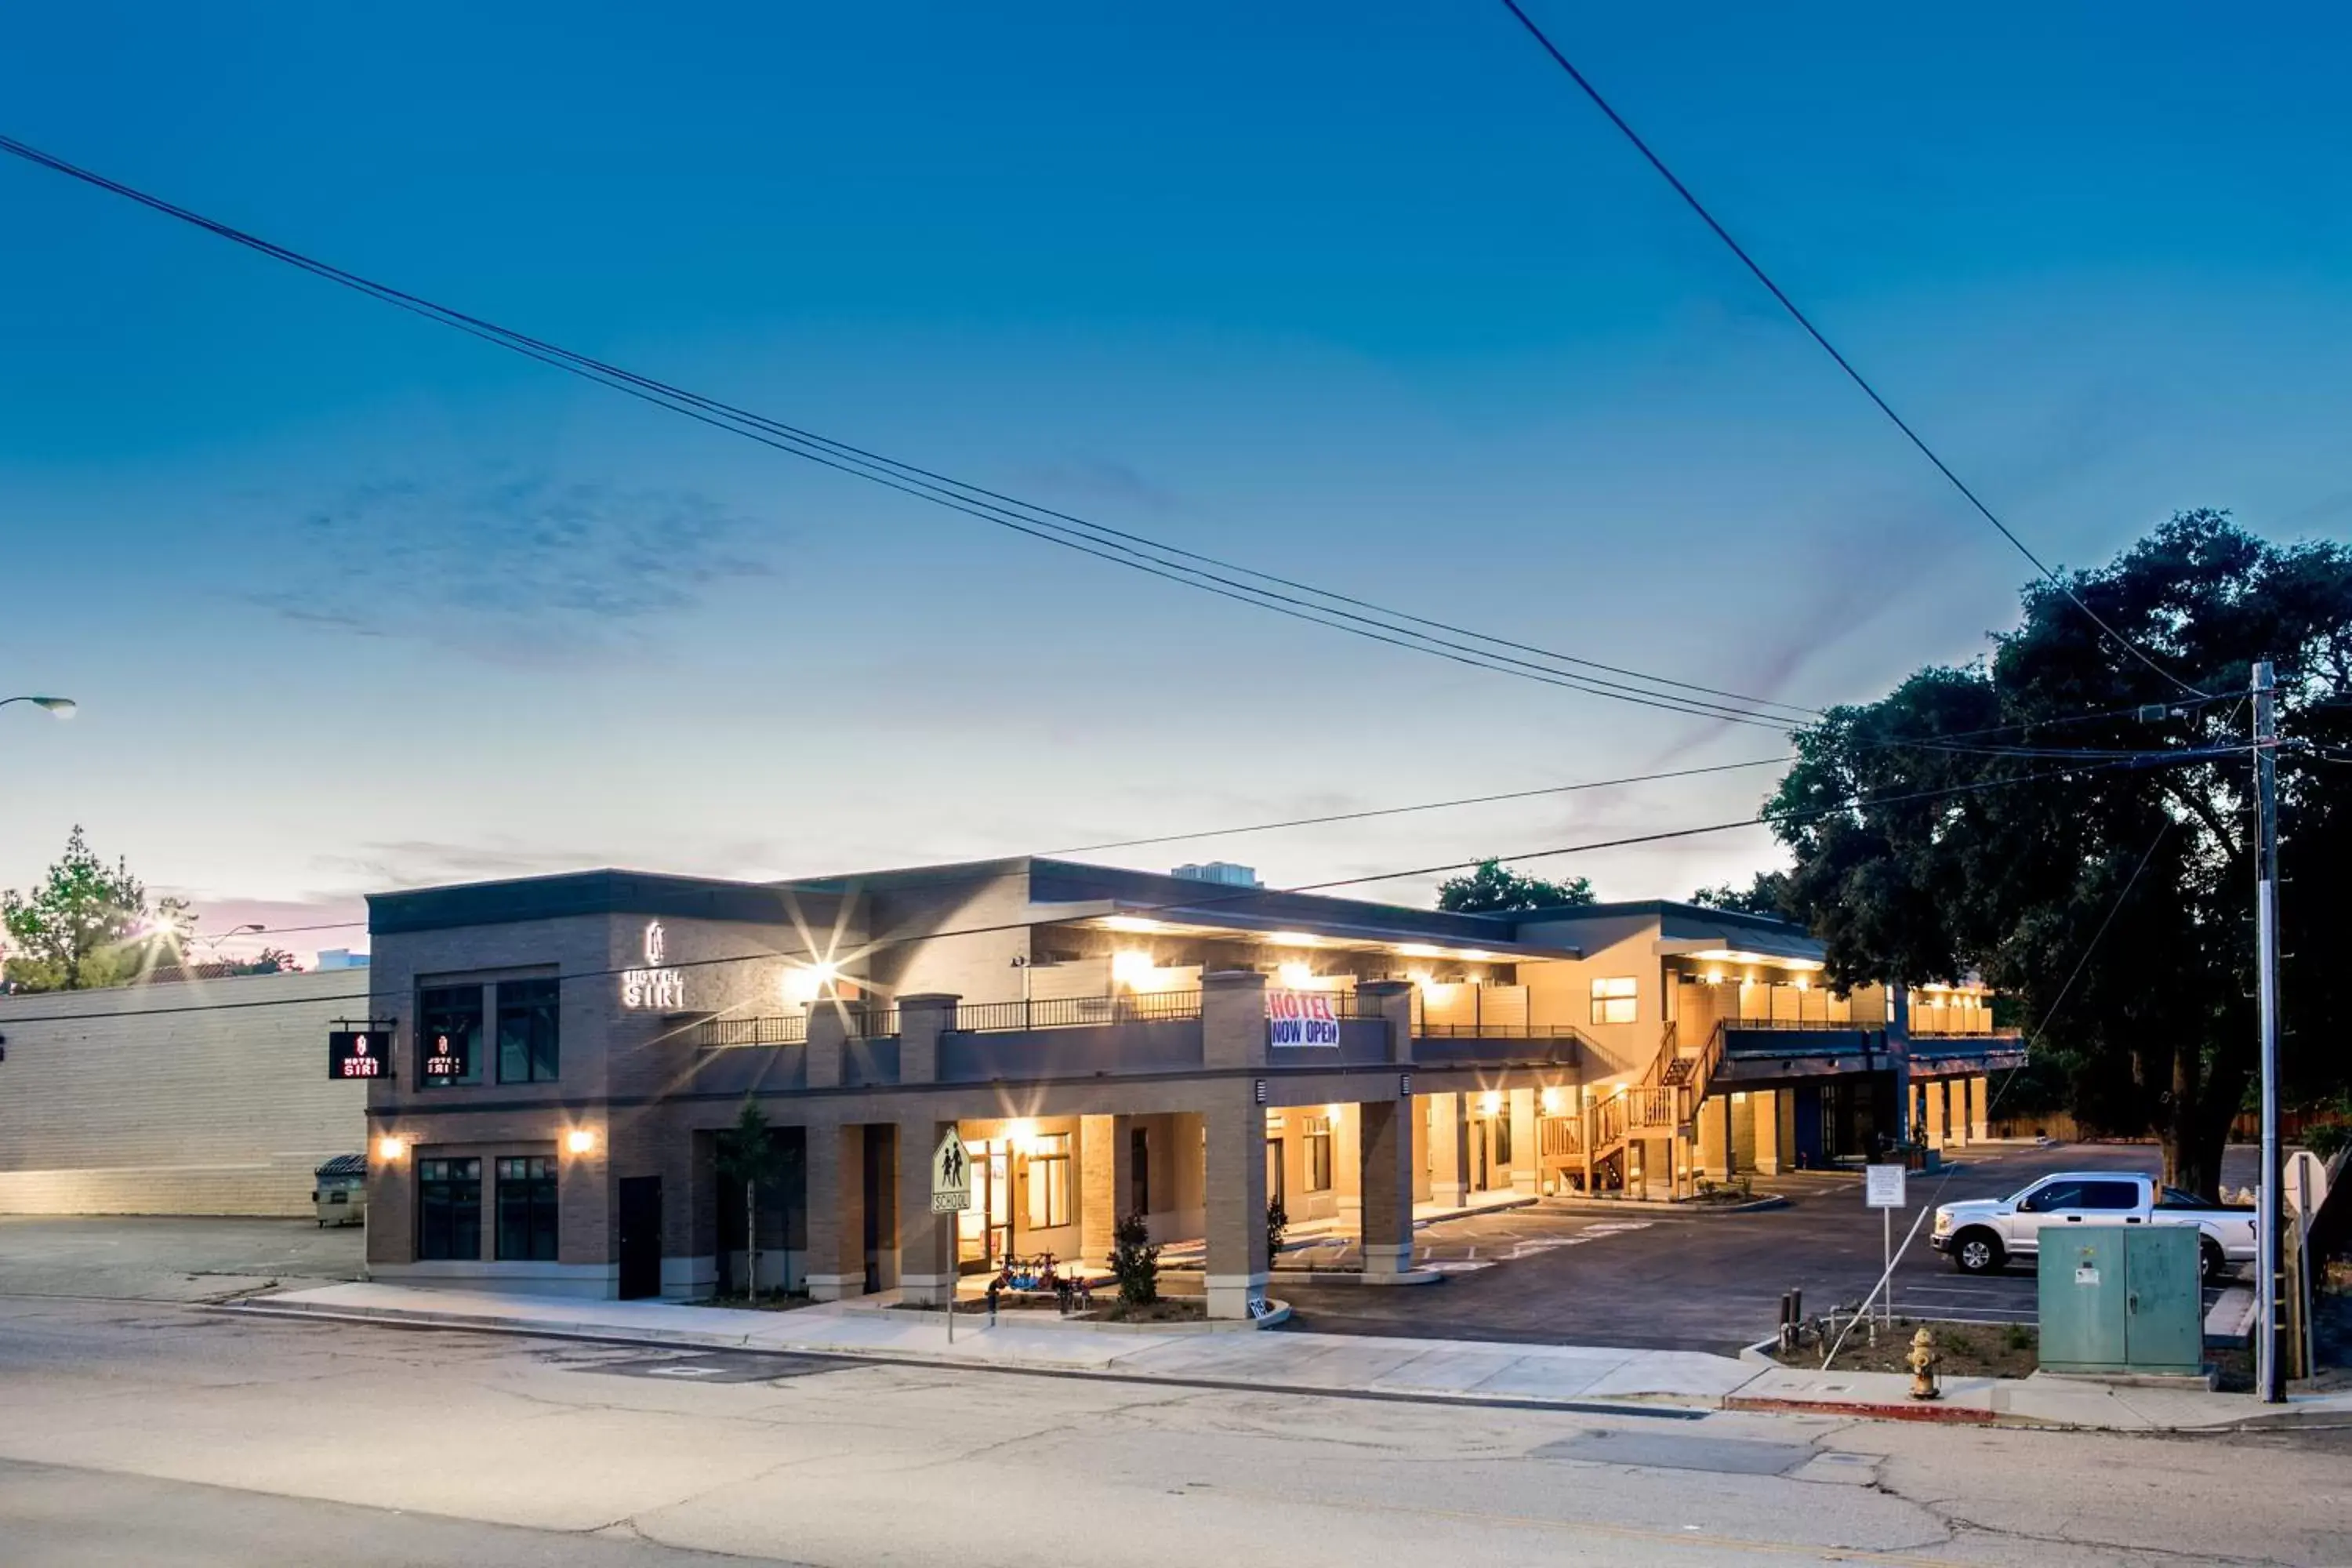 Property Building in Hotel Siri Downtown - Paso Robles